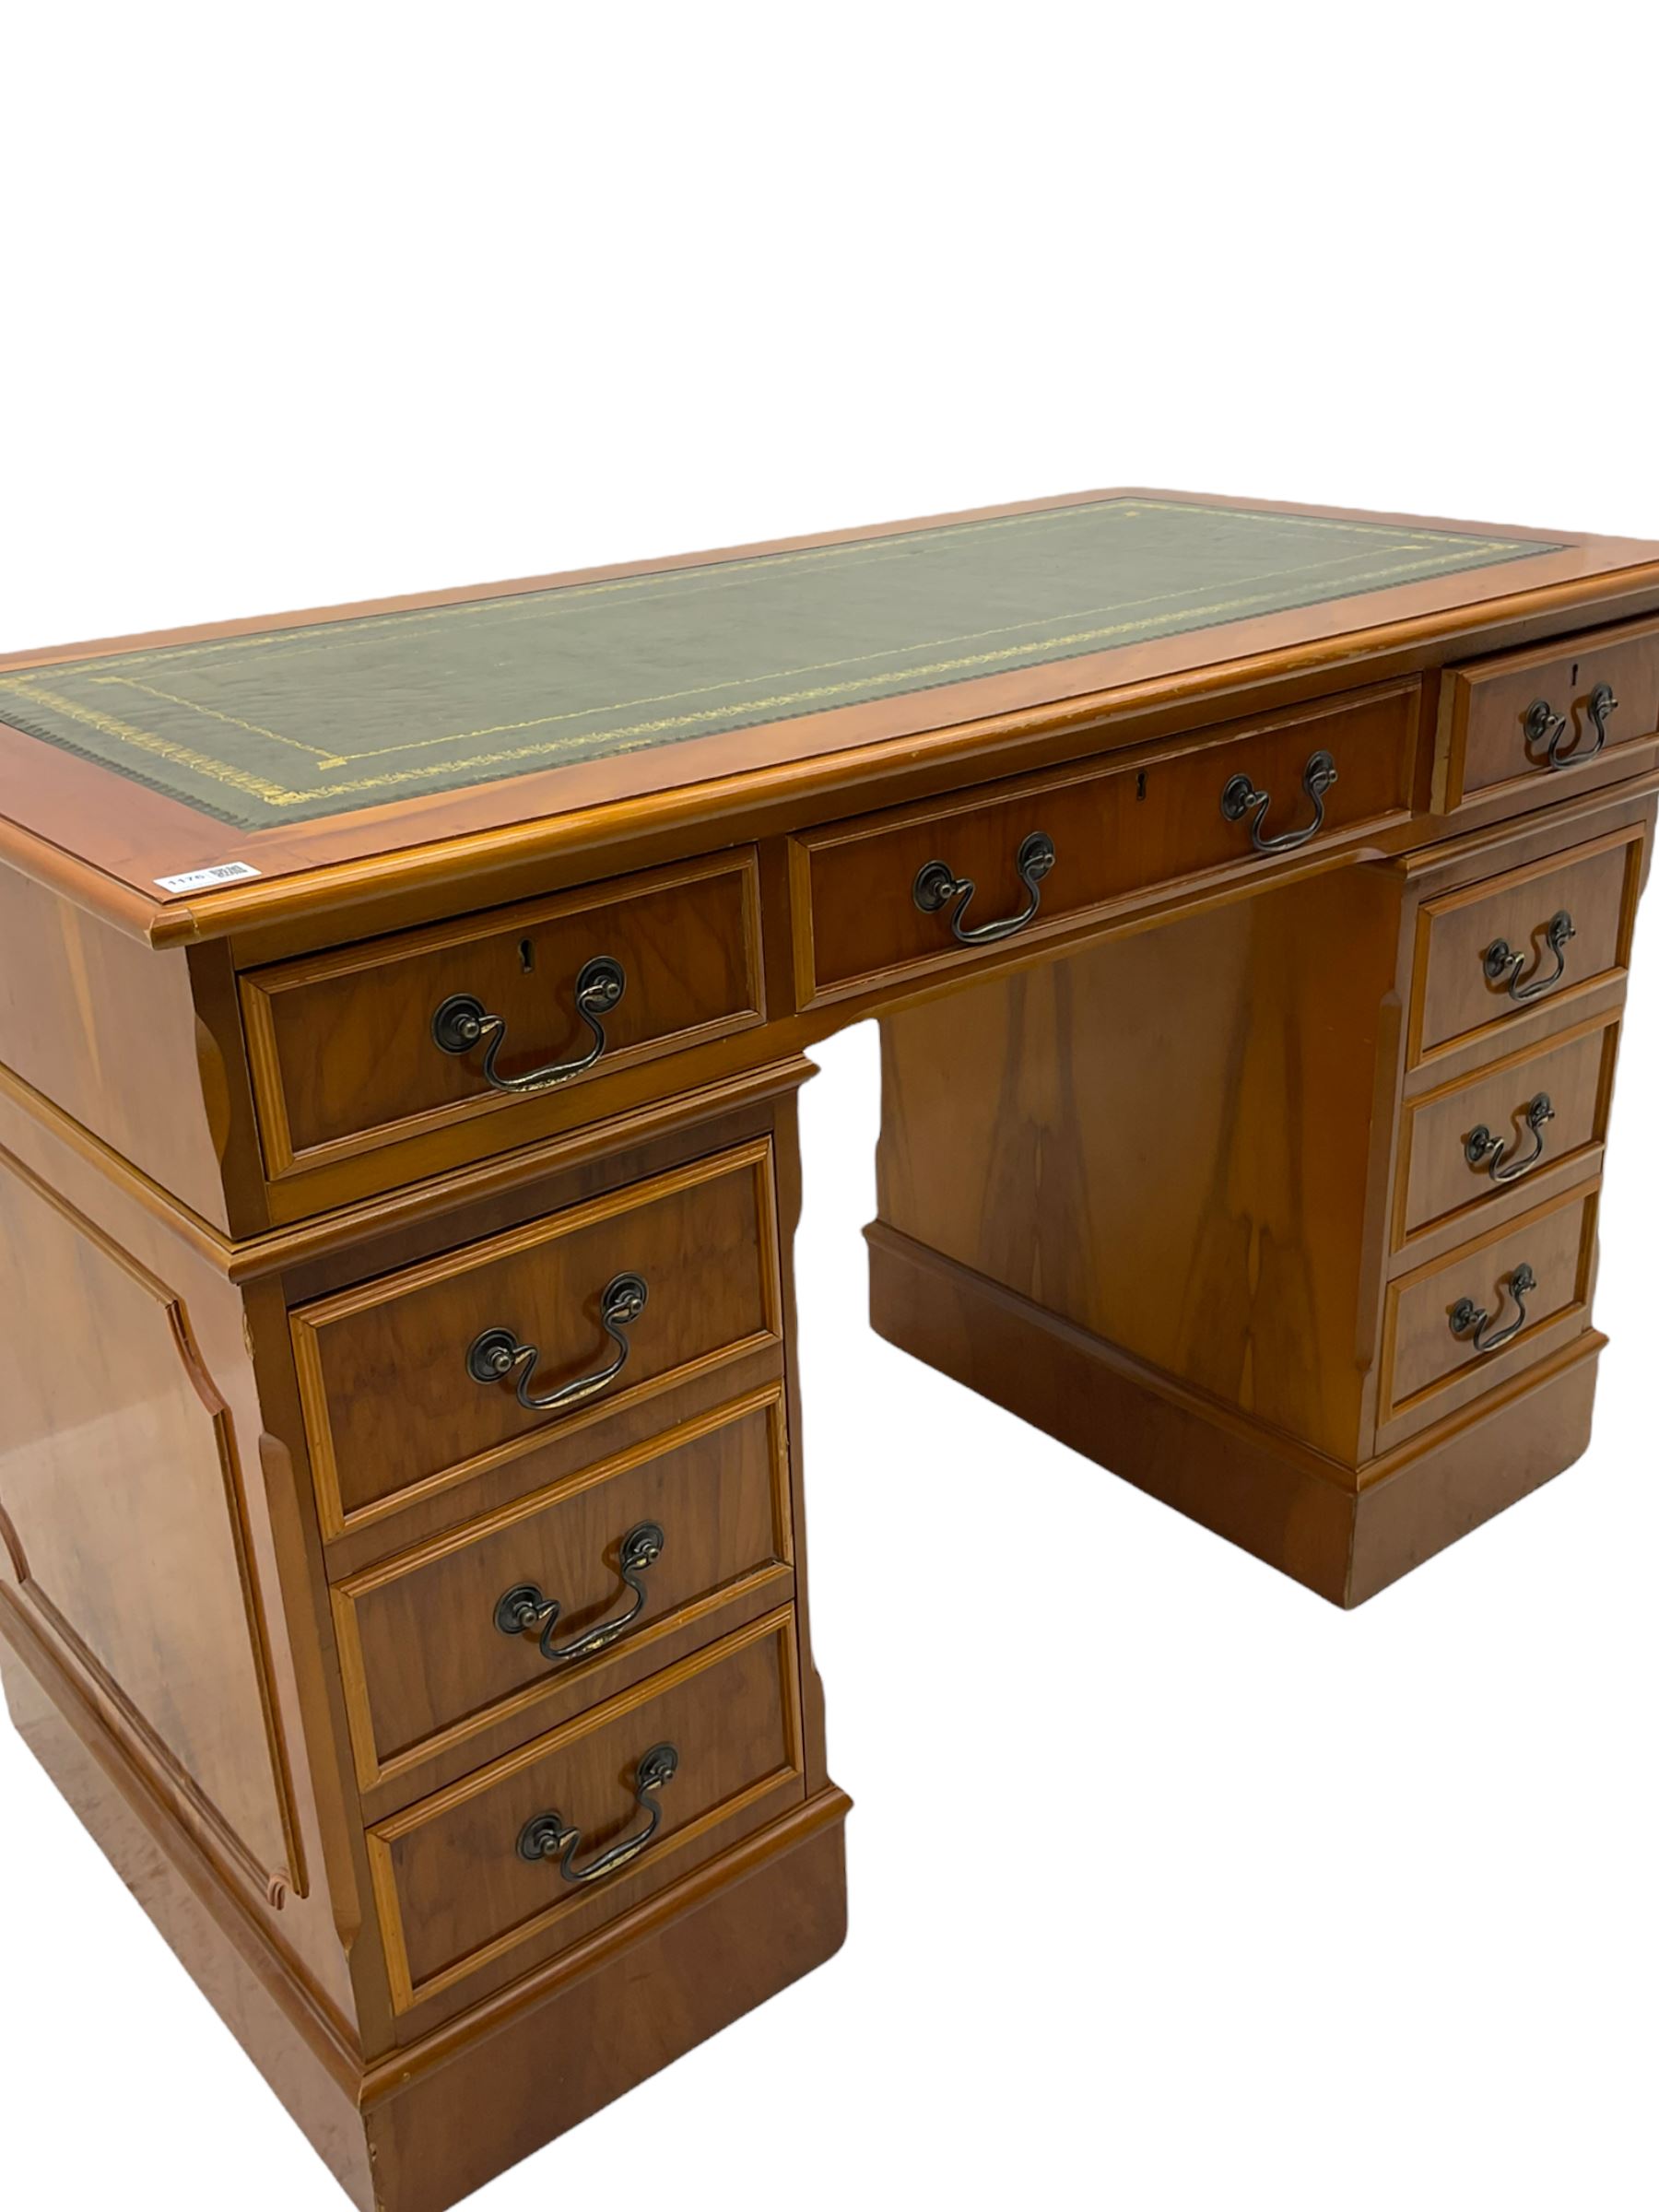 Yew wood twin pedestal office desk - Image 8 of 9